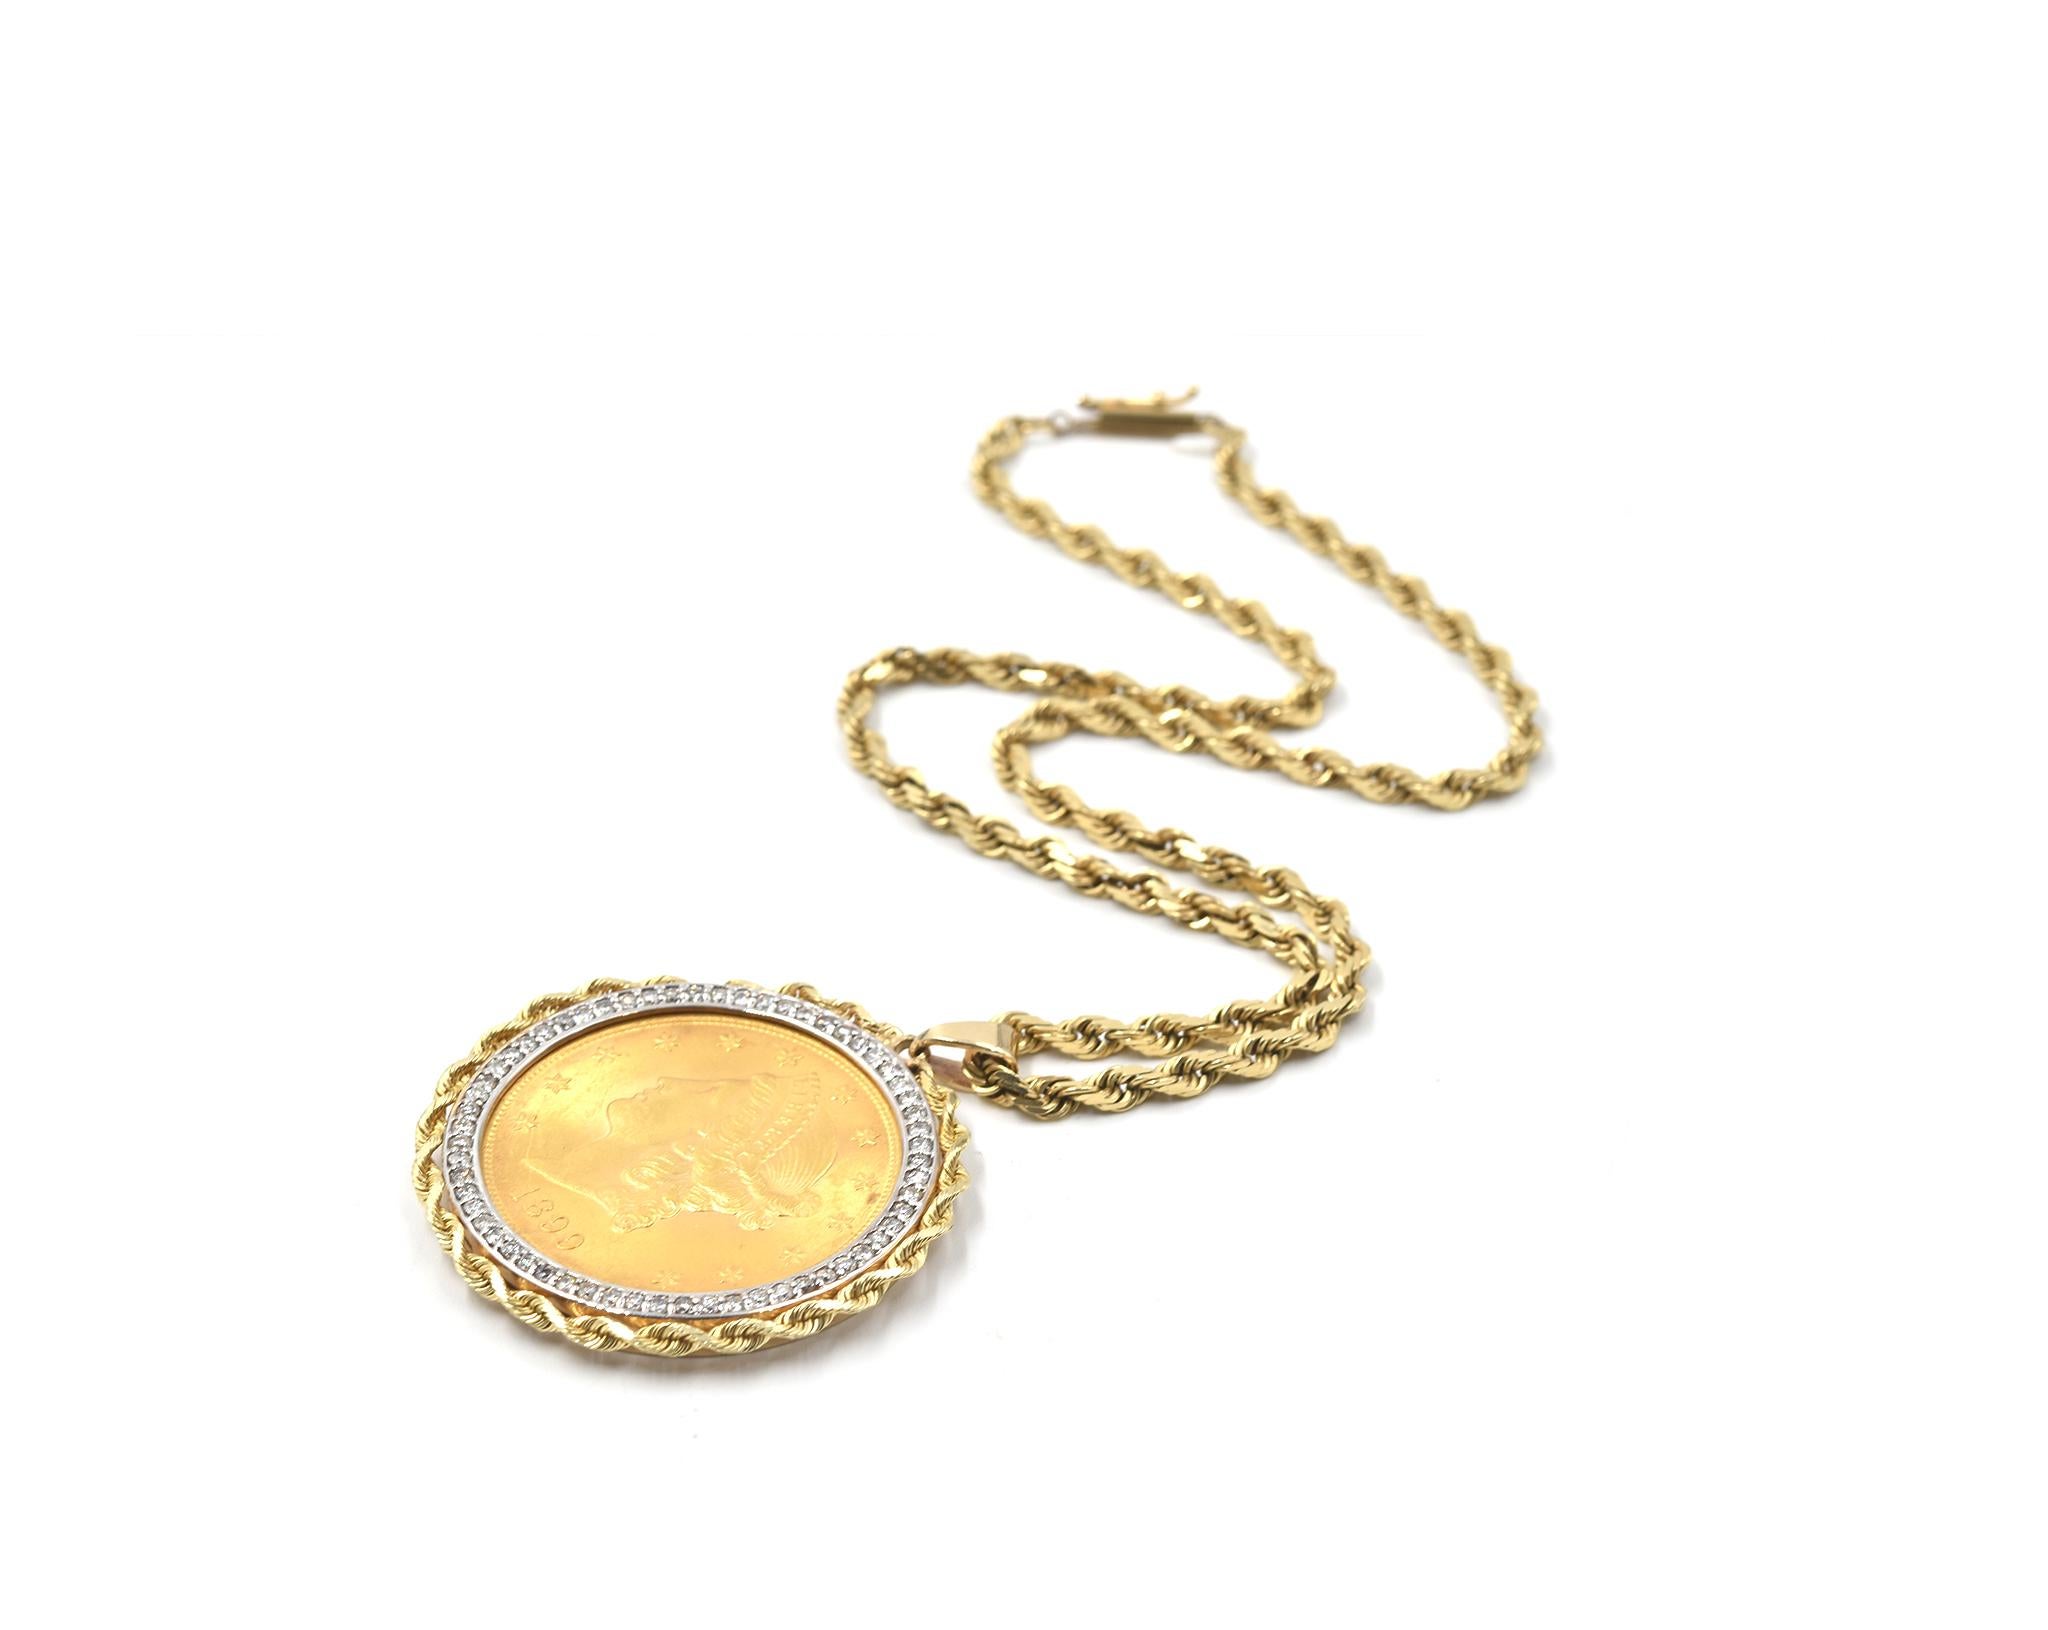 Designer: custom design
Material: 22k yellow gold liberty eagle coin & 14k yellow gold rope necklace
Diamonds: 60 round brilliant cut = 1.00 carat weight
Color: G
Clarity: VS
Dimensions: necklace is 16-inch long, pendant is 1 5/8-inch